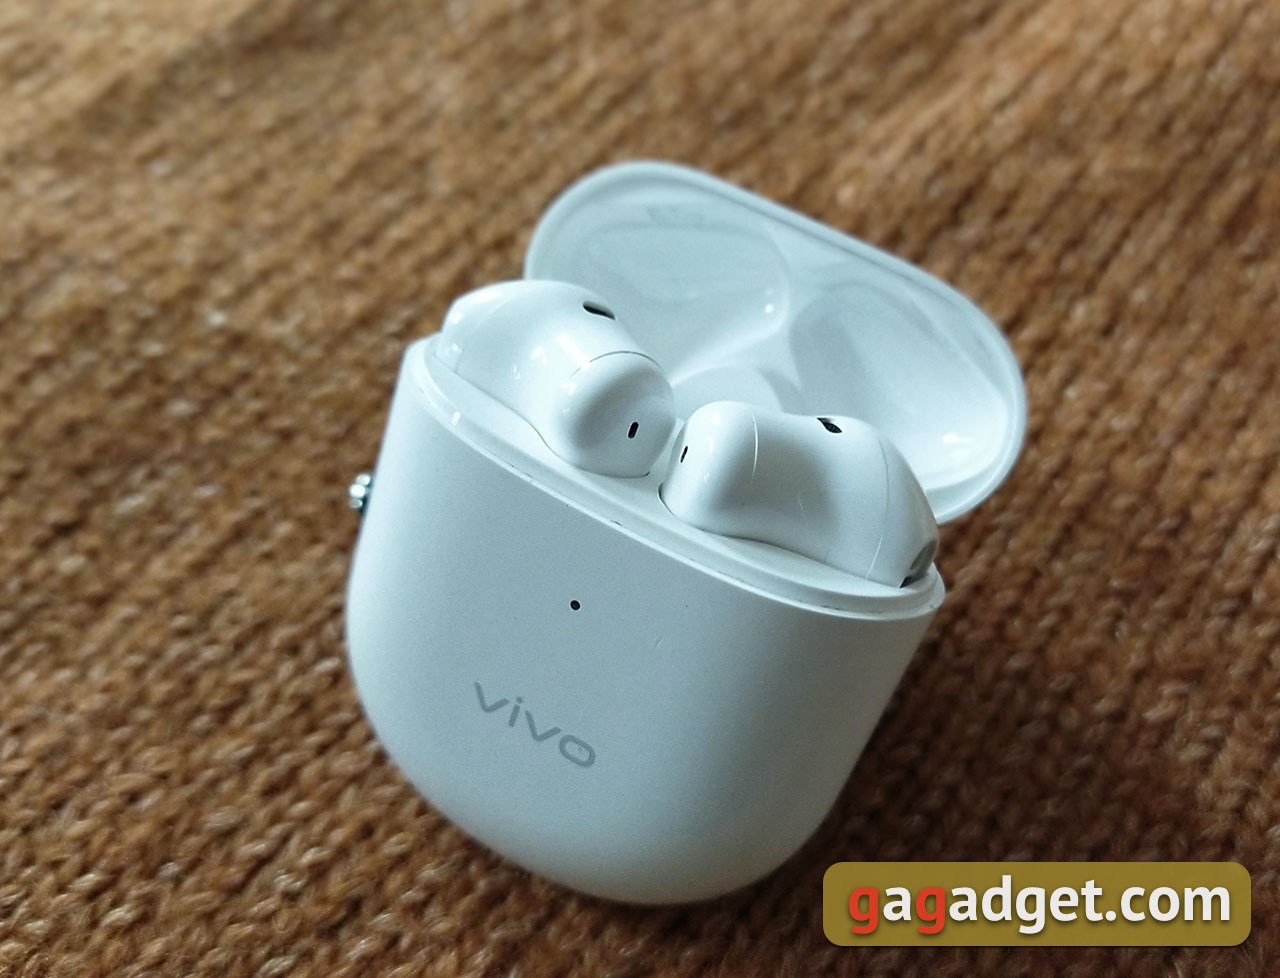 Vivo TWS 1 look back: true wireless earbuds powered by Qualcomm QCC5126 flagship processor